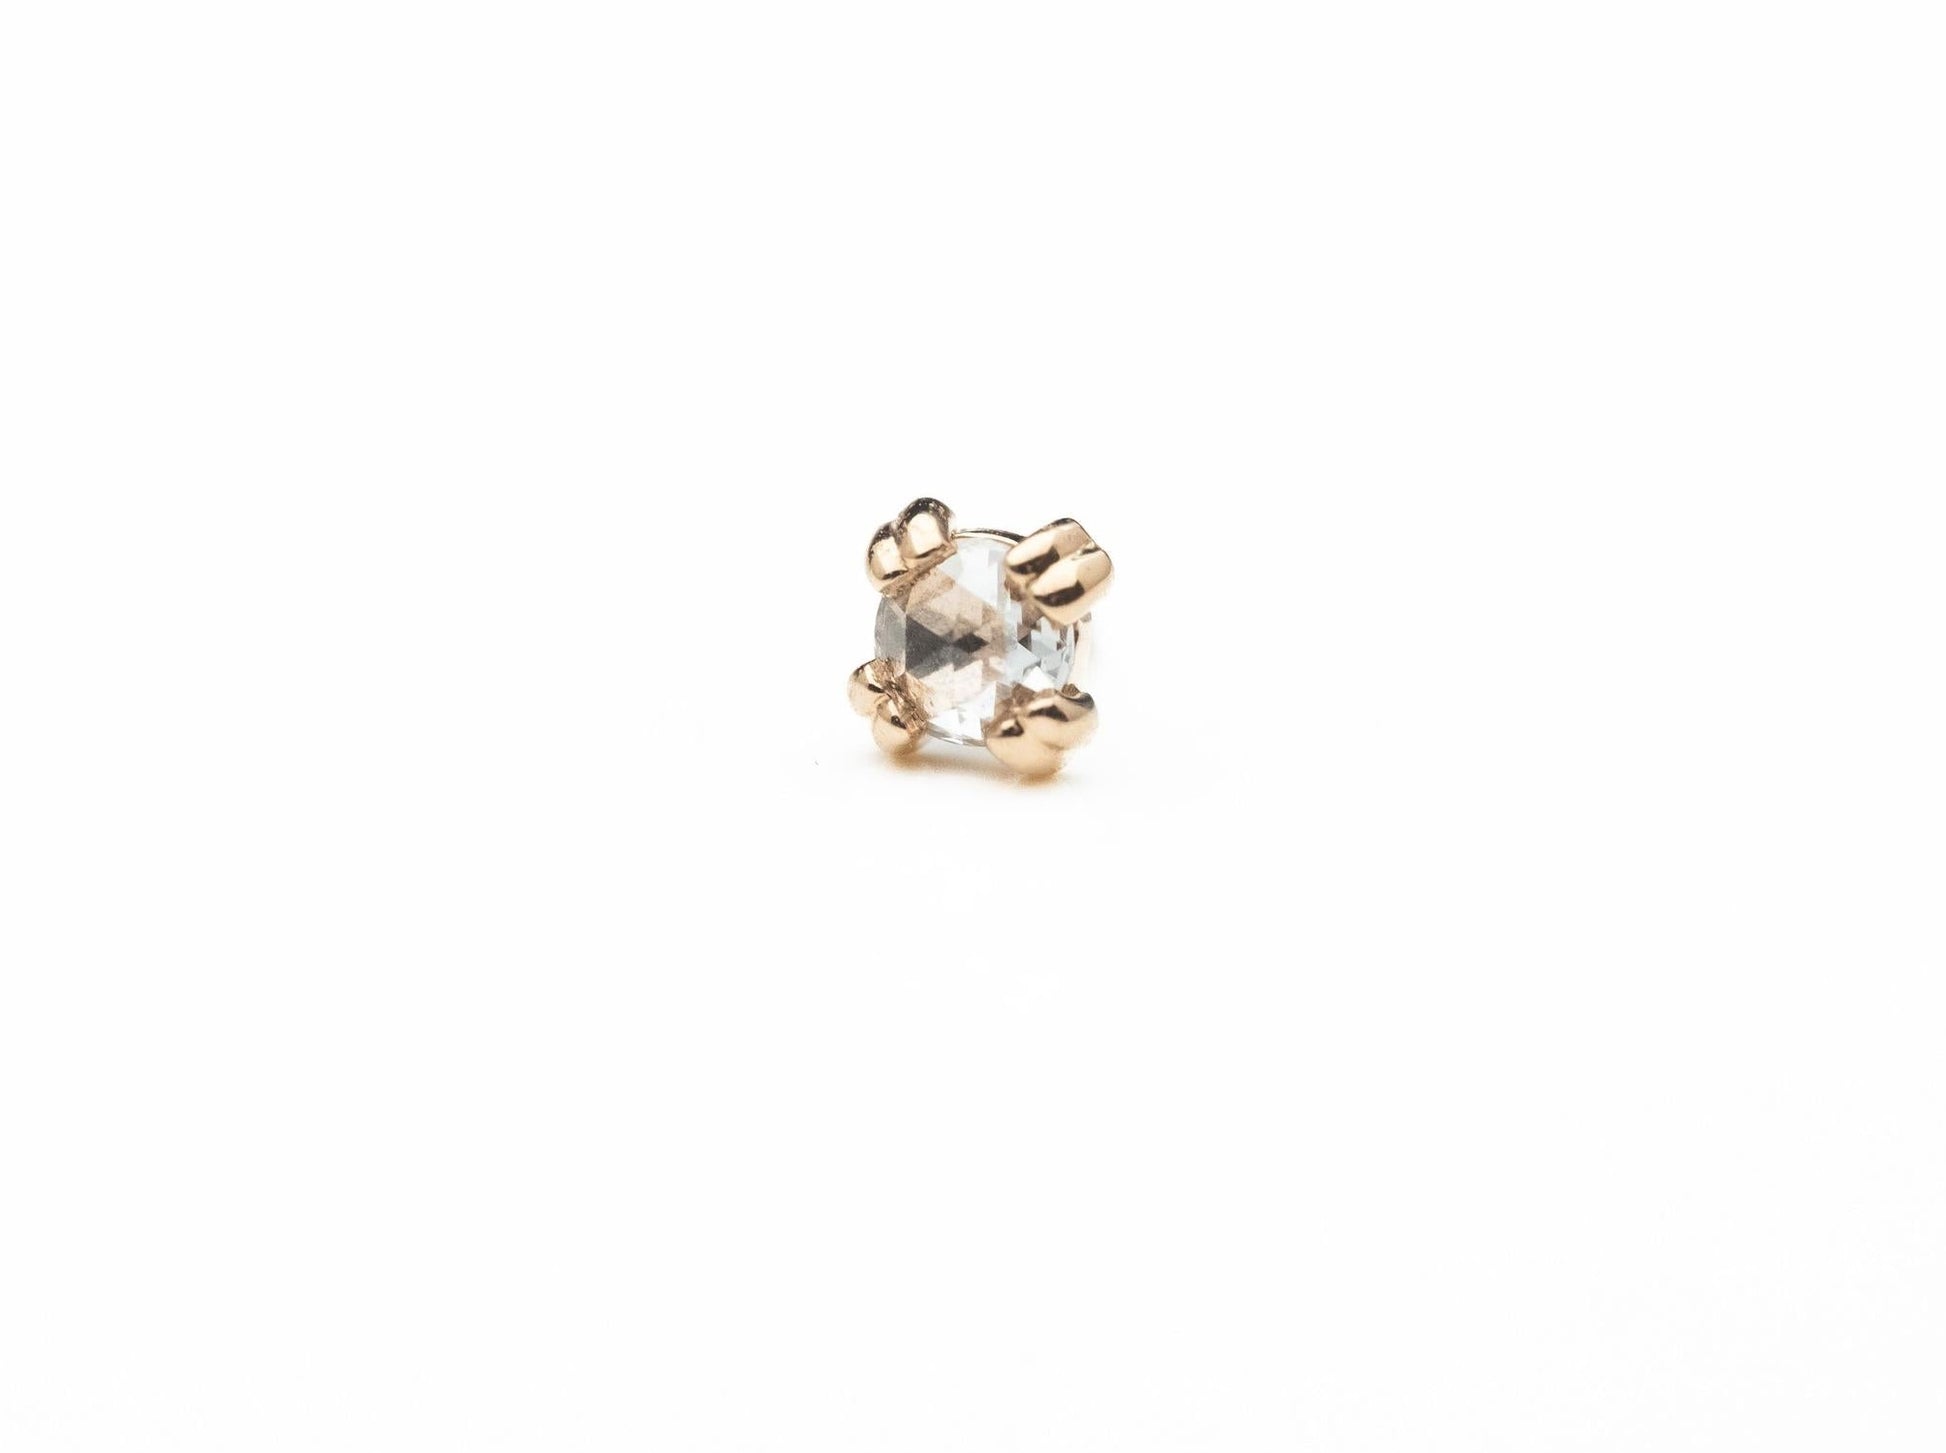 Cab Prong 2.5mm Rose Cut VS Diamond in 14k Rose Gold Threadless by BVLA